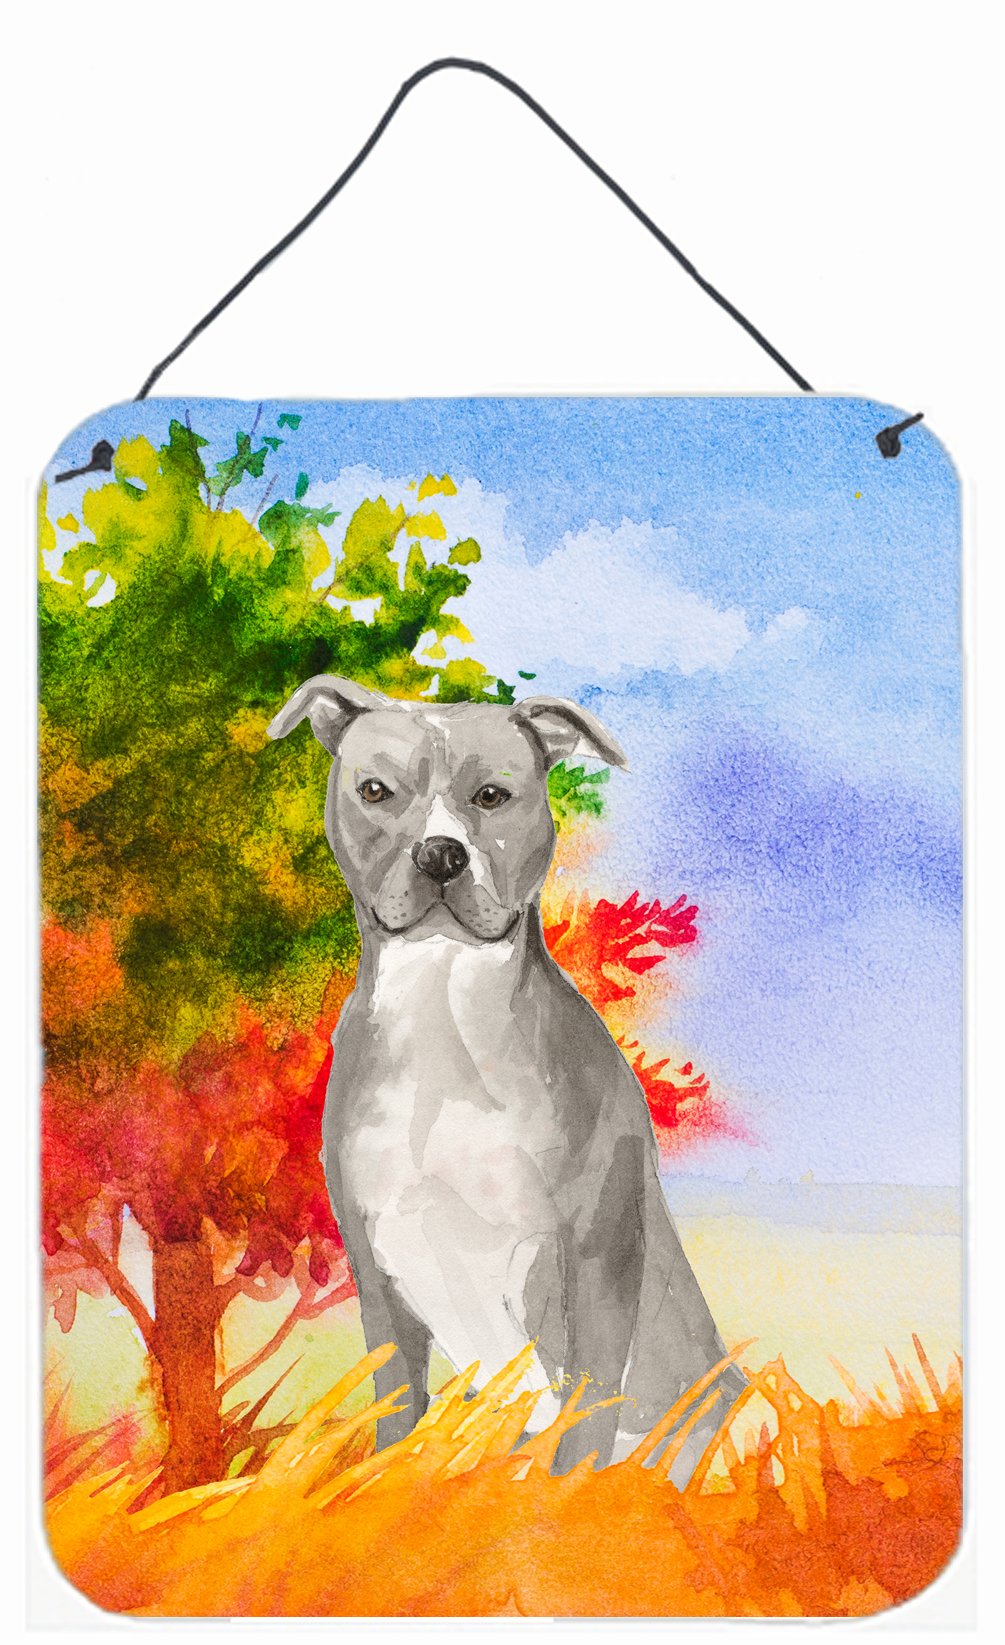 Fall Staffordshire Bull Terrier Wall or Door Hanging Prints CK1962DS1216 by Caroline's Treasures